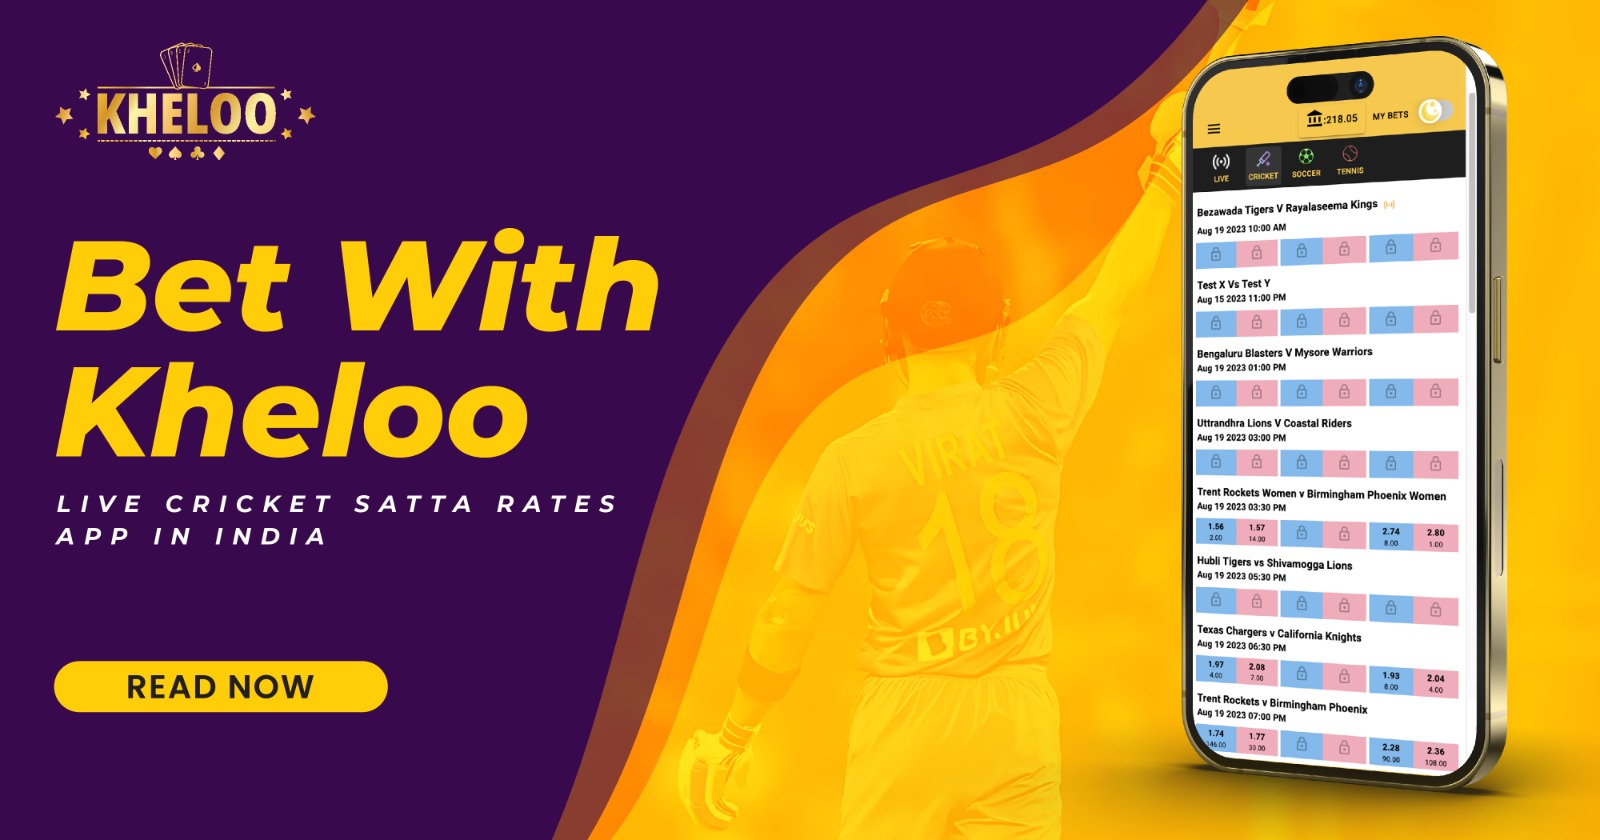 Bet with Kheloo Live Cricket Satta Rates App in India